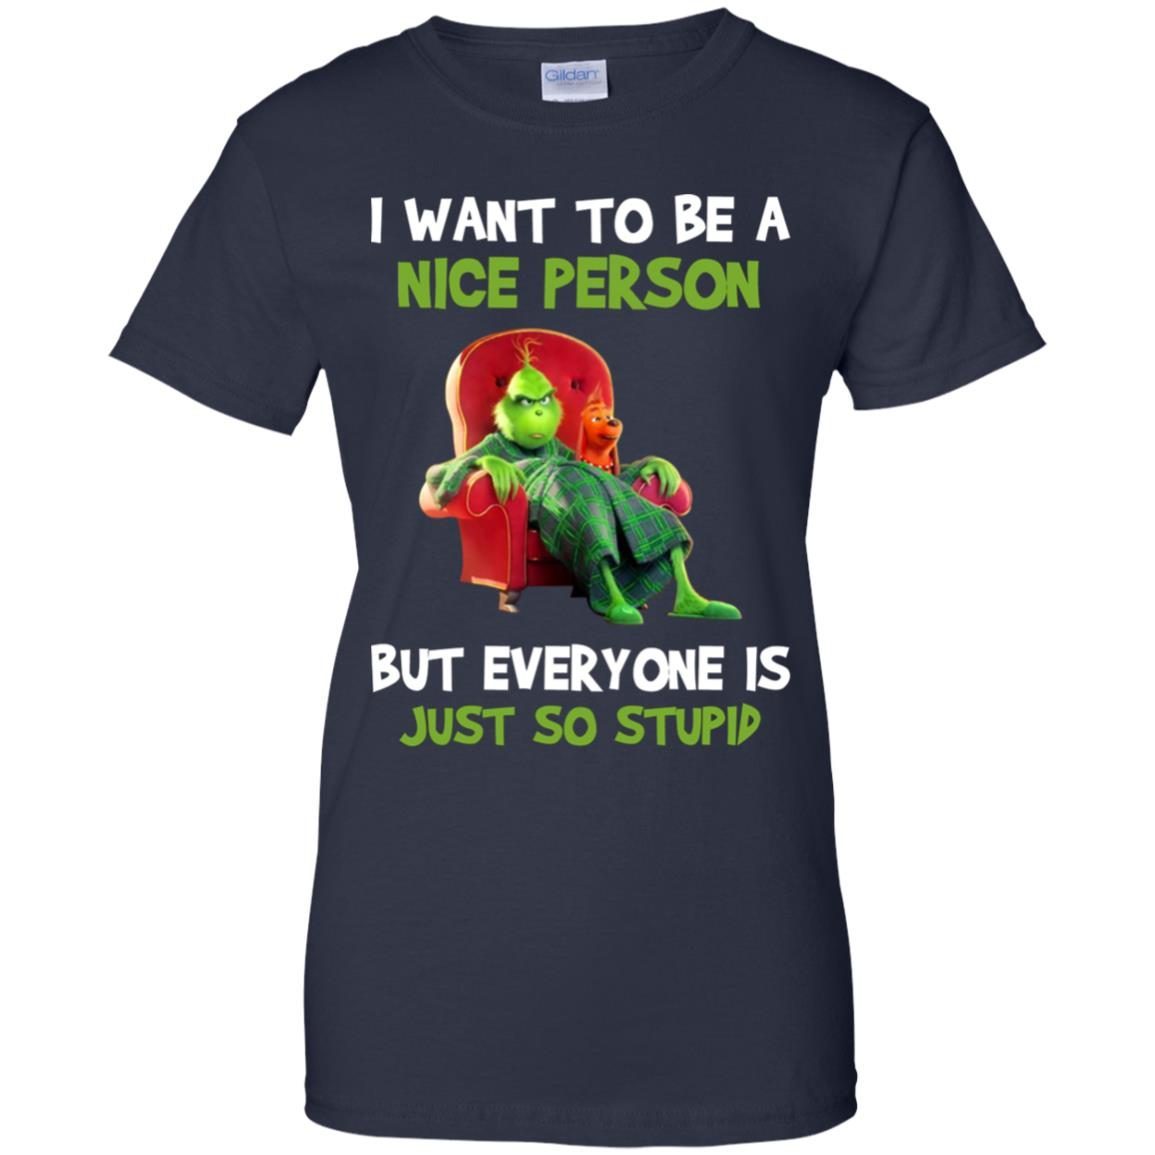 Mr Grinch I want to be a nice person shirt